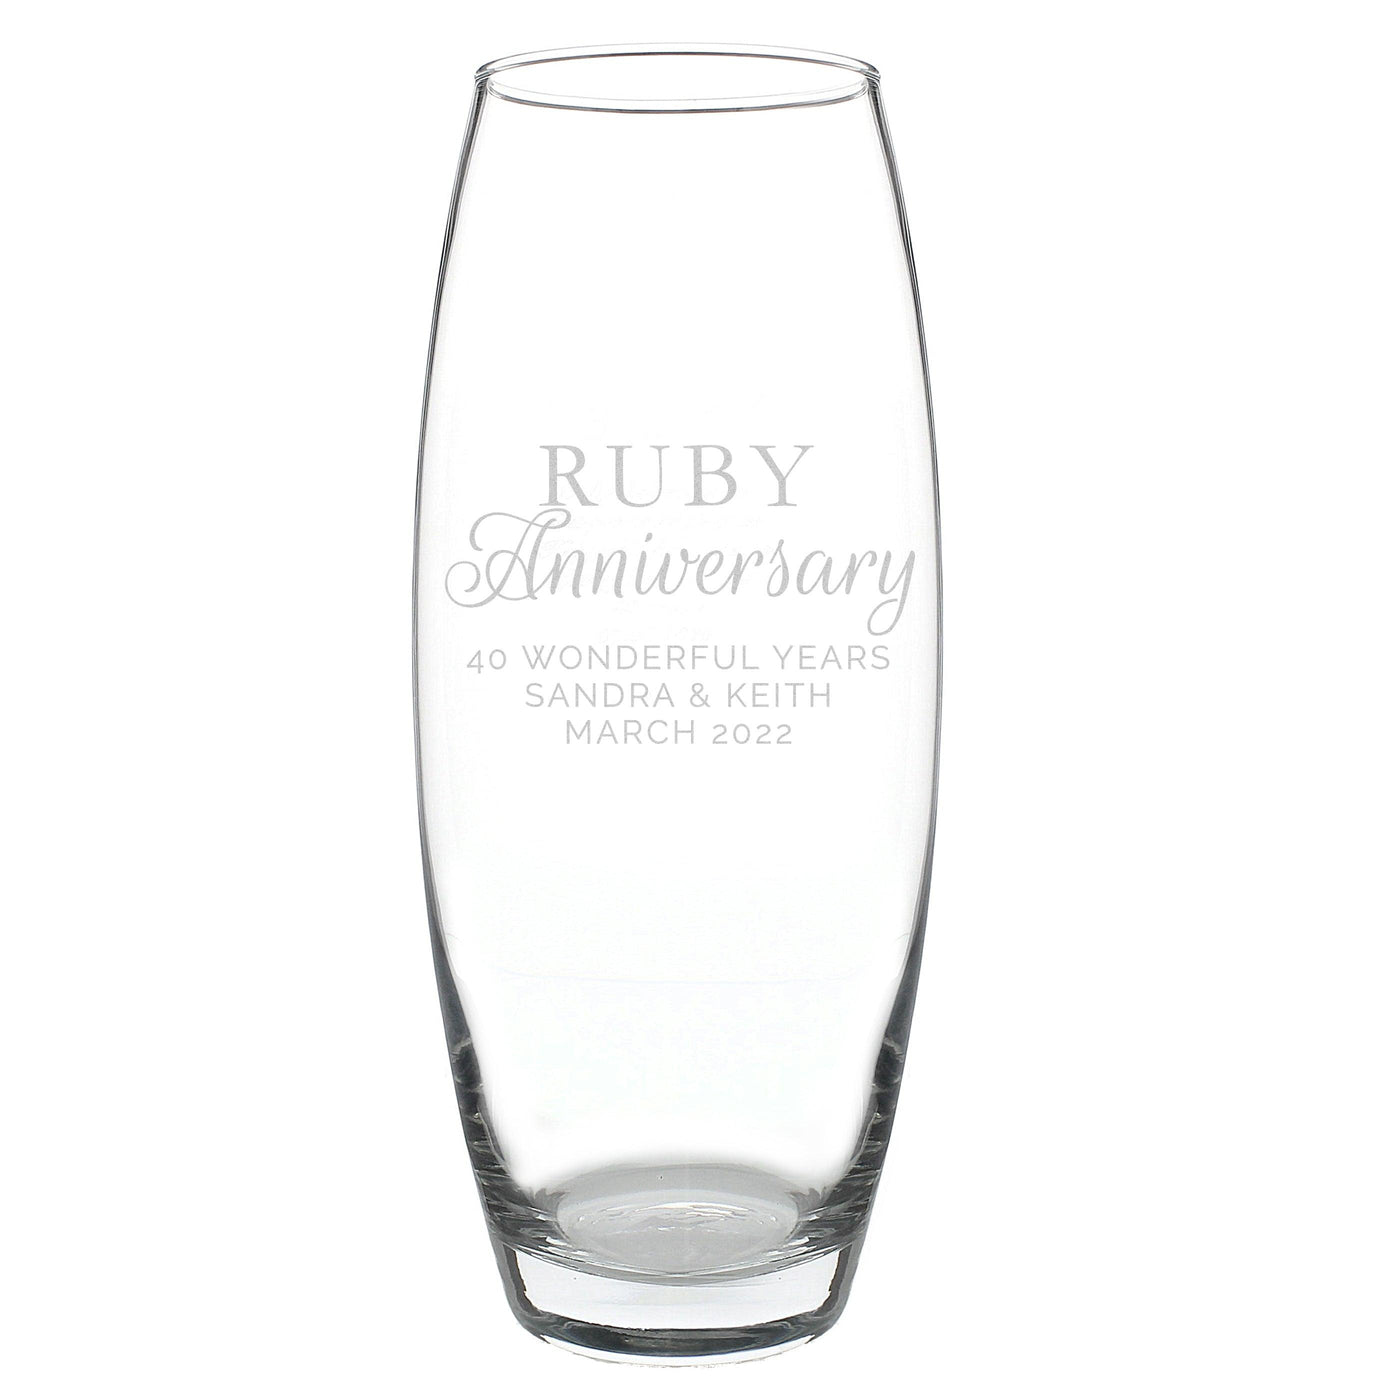 Personalised 'Ruby Anniversary' Glass Bullet Vase - Shop Personalised Gifts